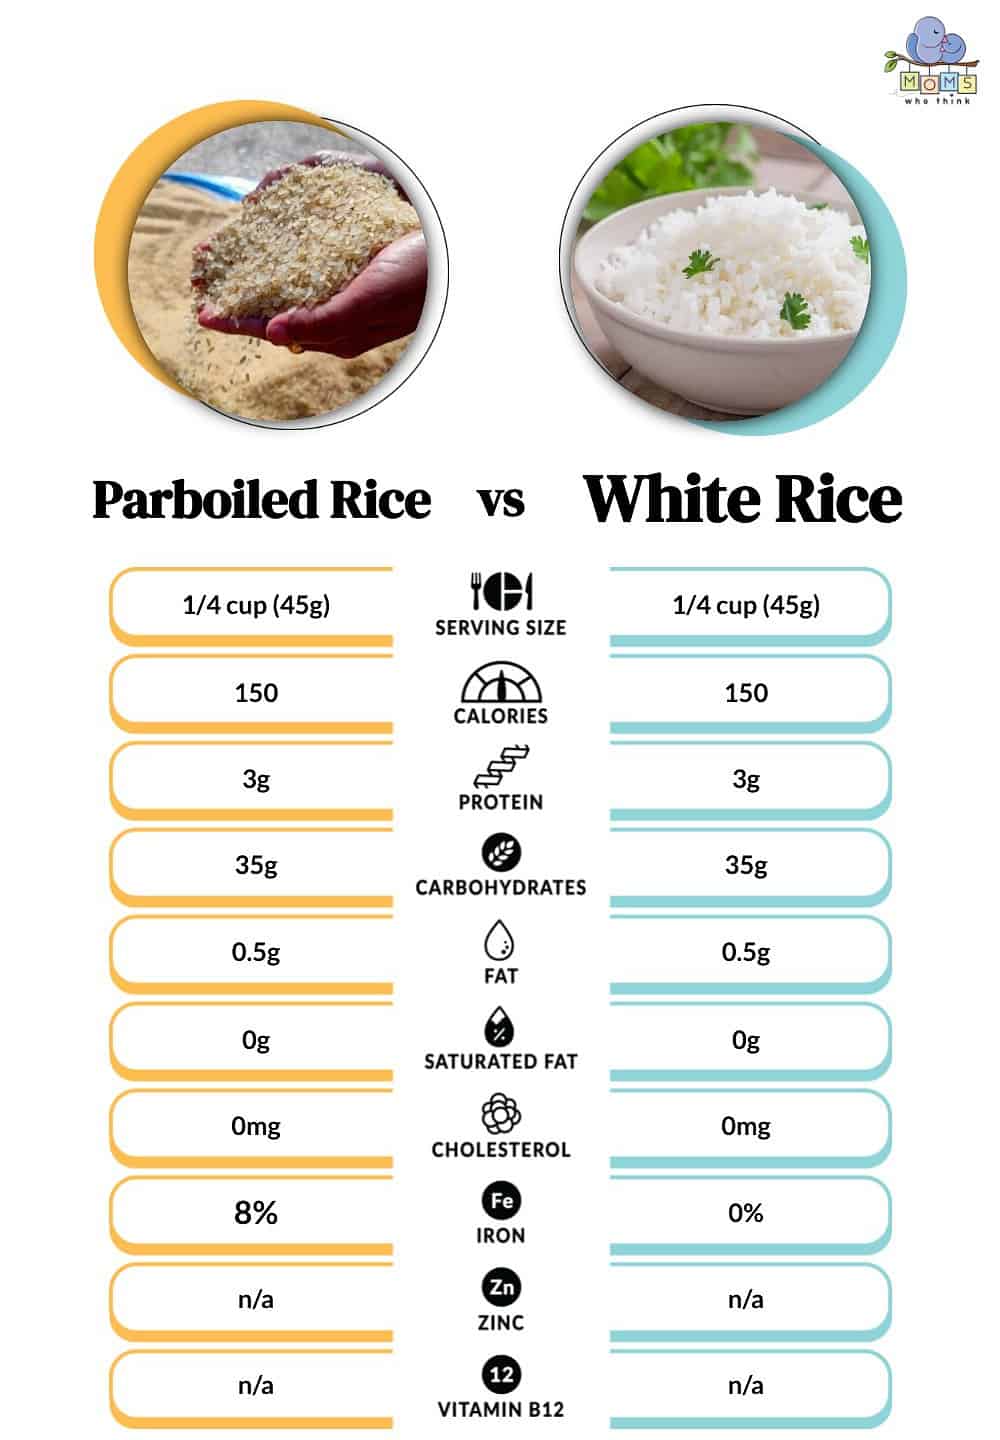 Parboiled Rice vs White Rice Nutritional Facts